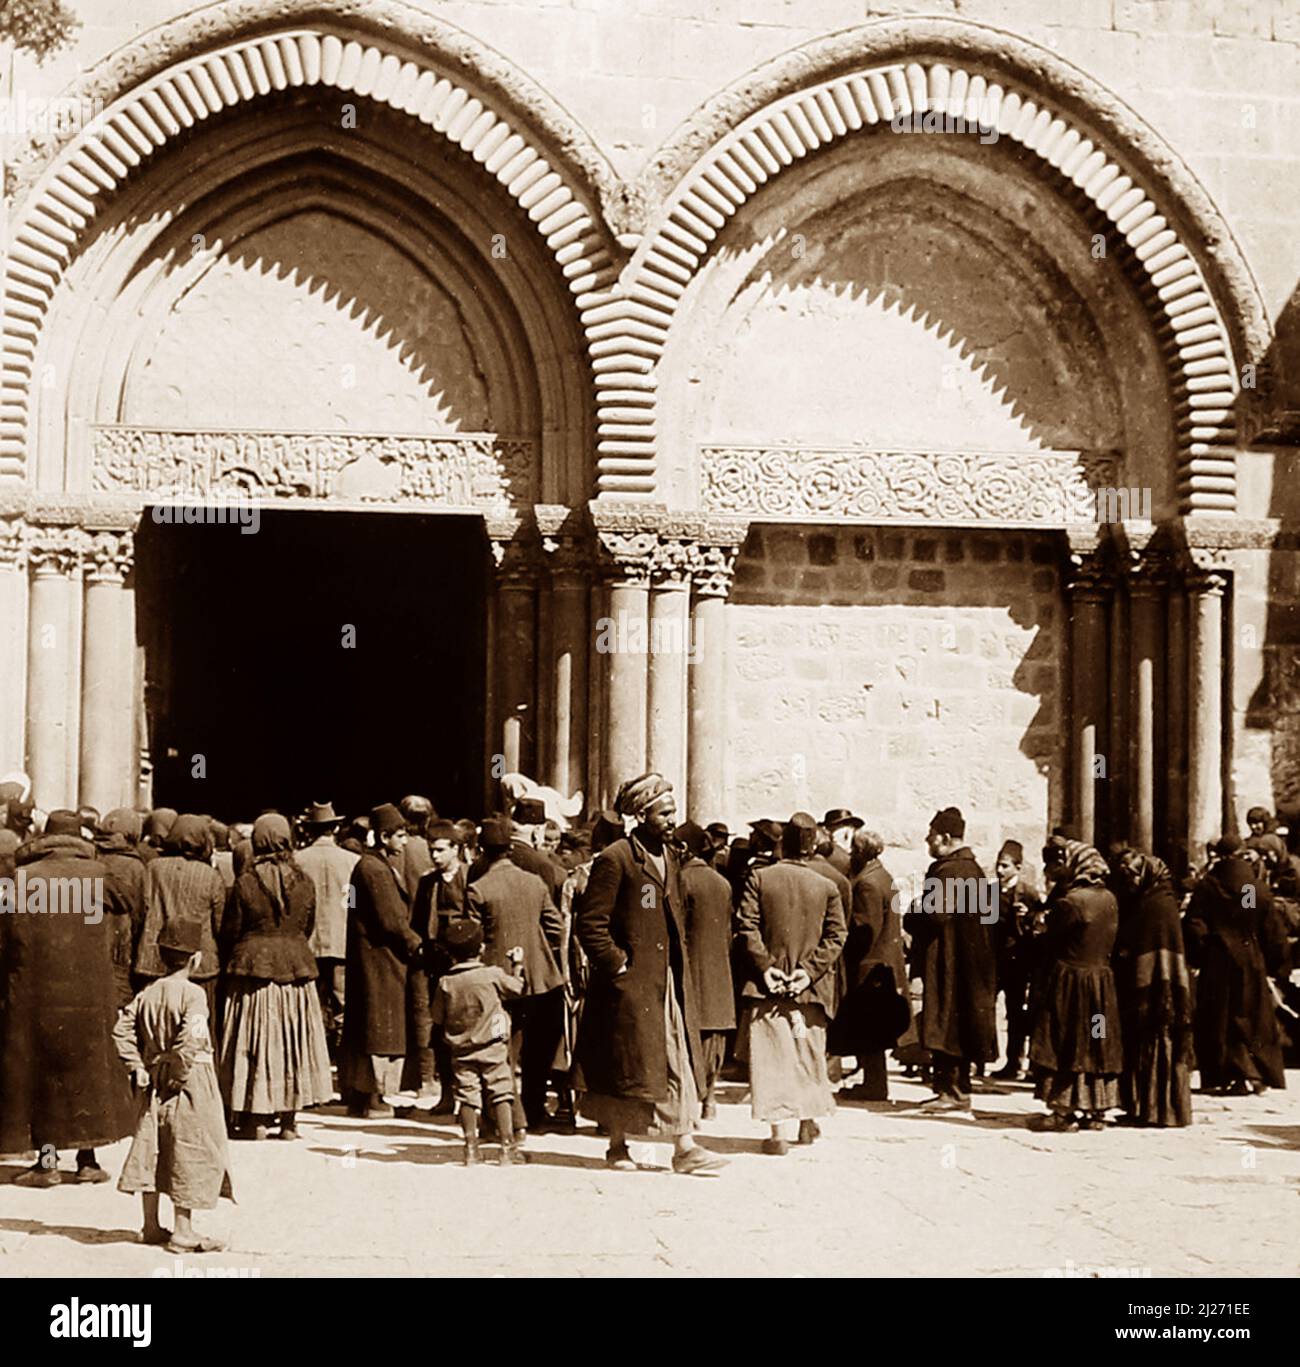 Church of the Holy Sepulchre, Jerusalem, Israel, early 1900s Stock Photo